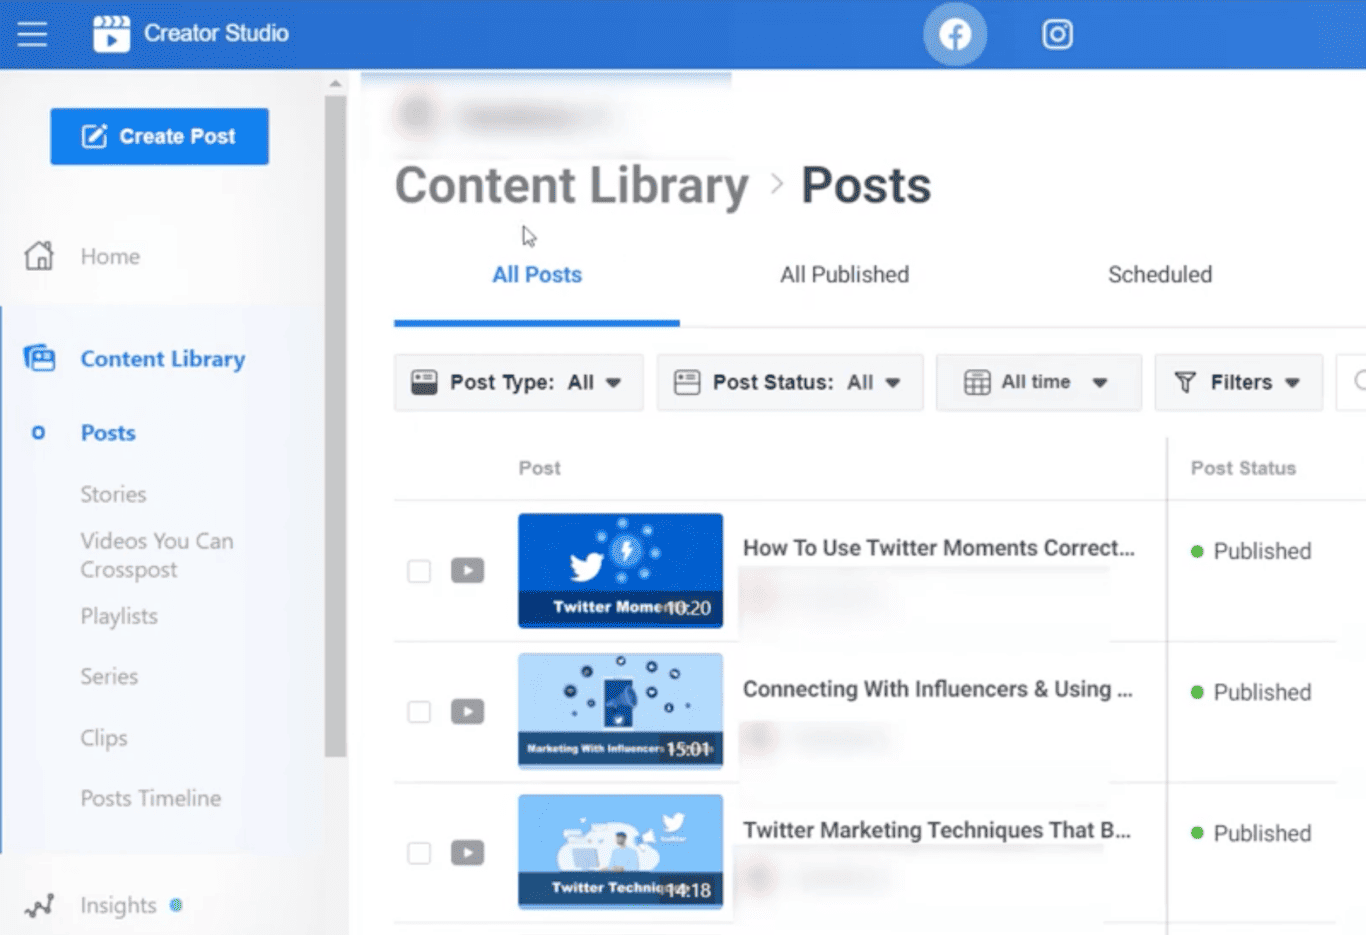 Screenshot of Facebook Creator Studio dashboard highlighting the Content Library and Posts section.